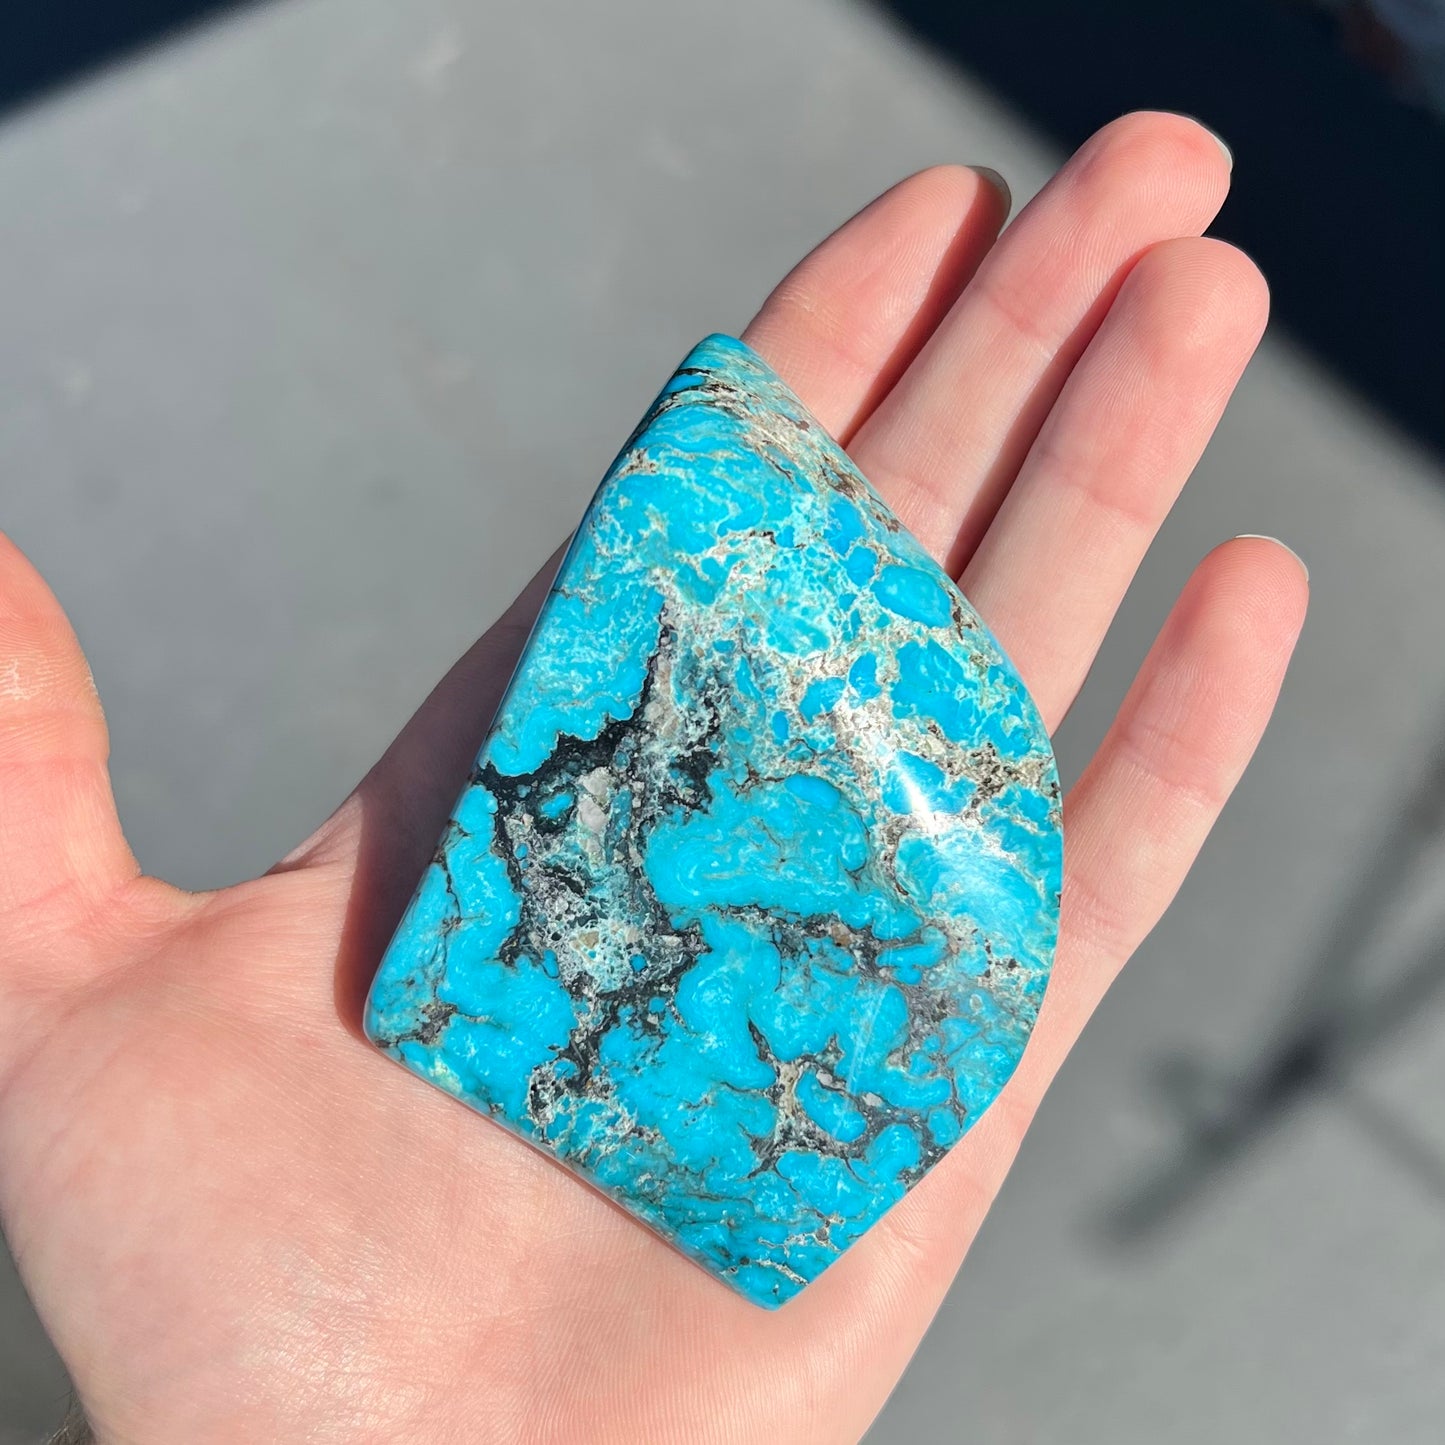 A large polished piece of Kingman turquoise.  The stone is blue with black veining.